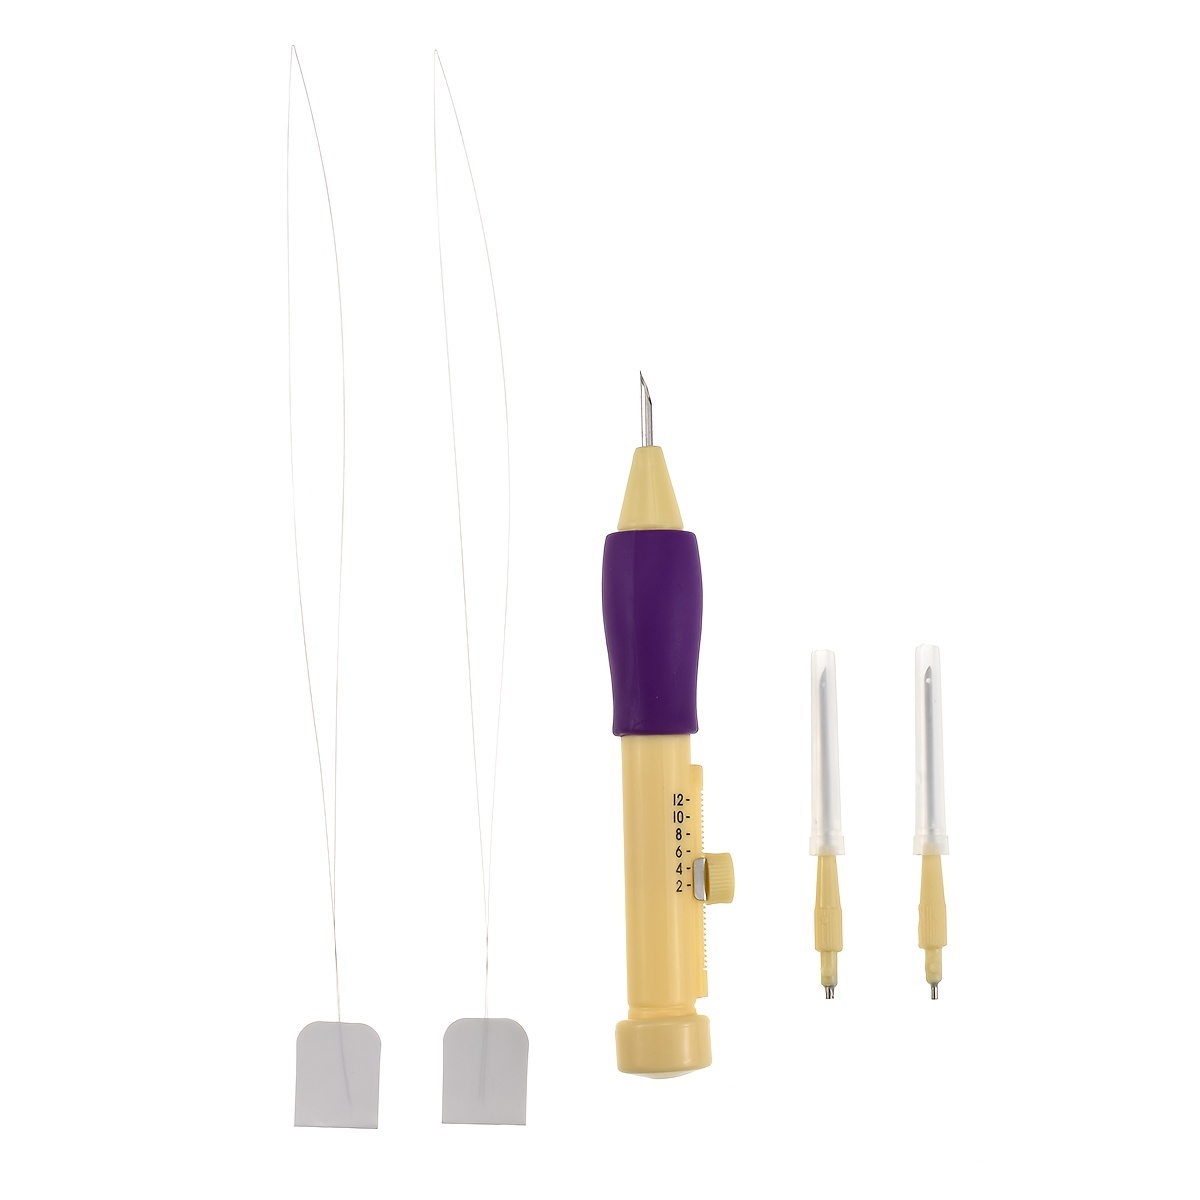 Embroidery Needles For Hand Sewing Embroidery Pen Set For